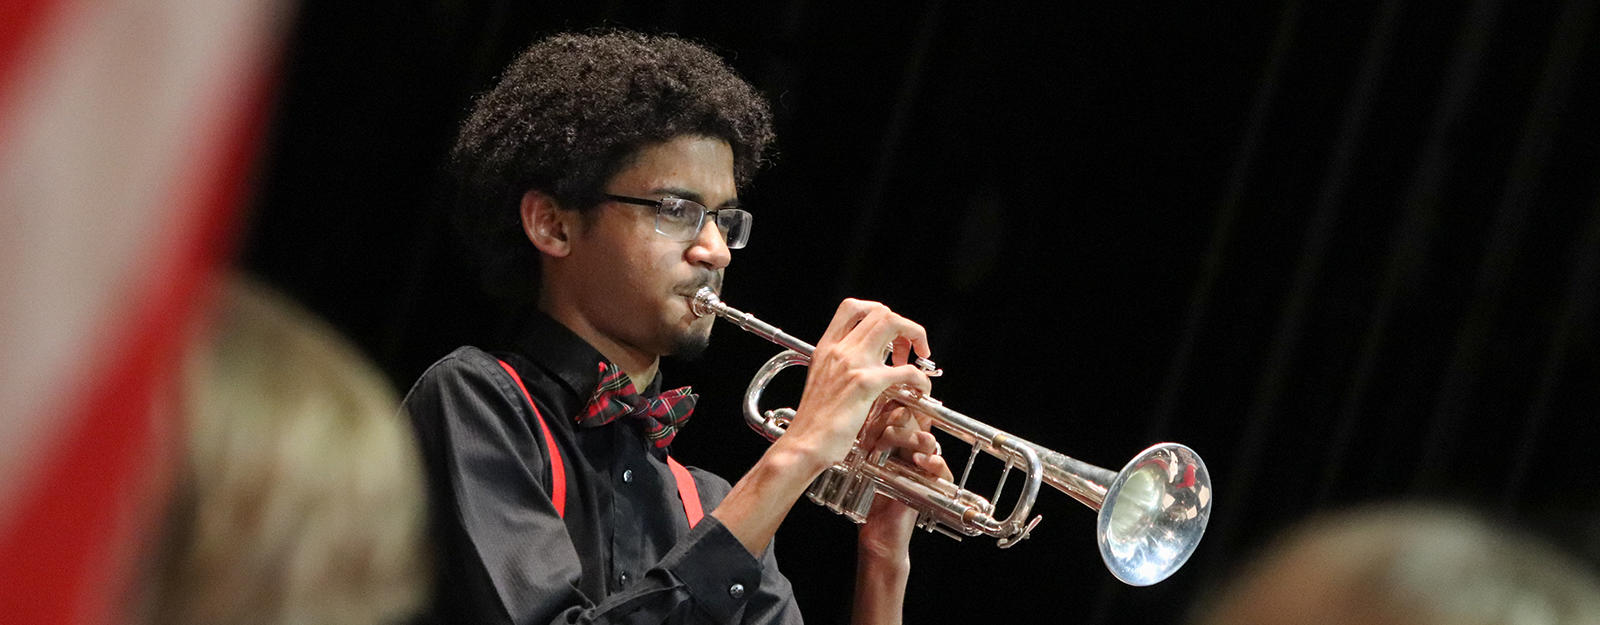 Student playing a trumpet during a concert.